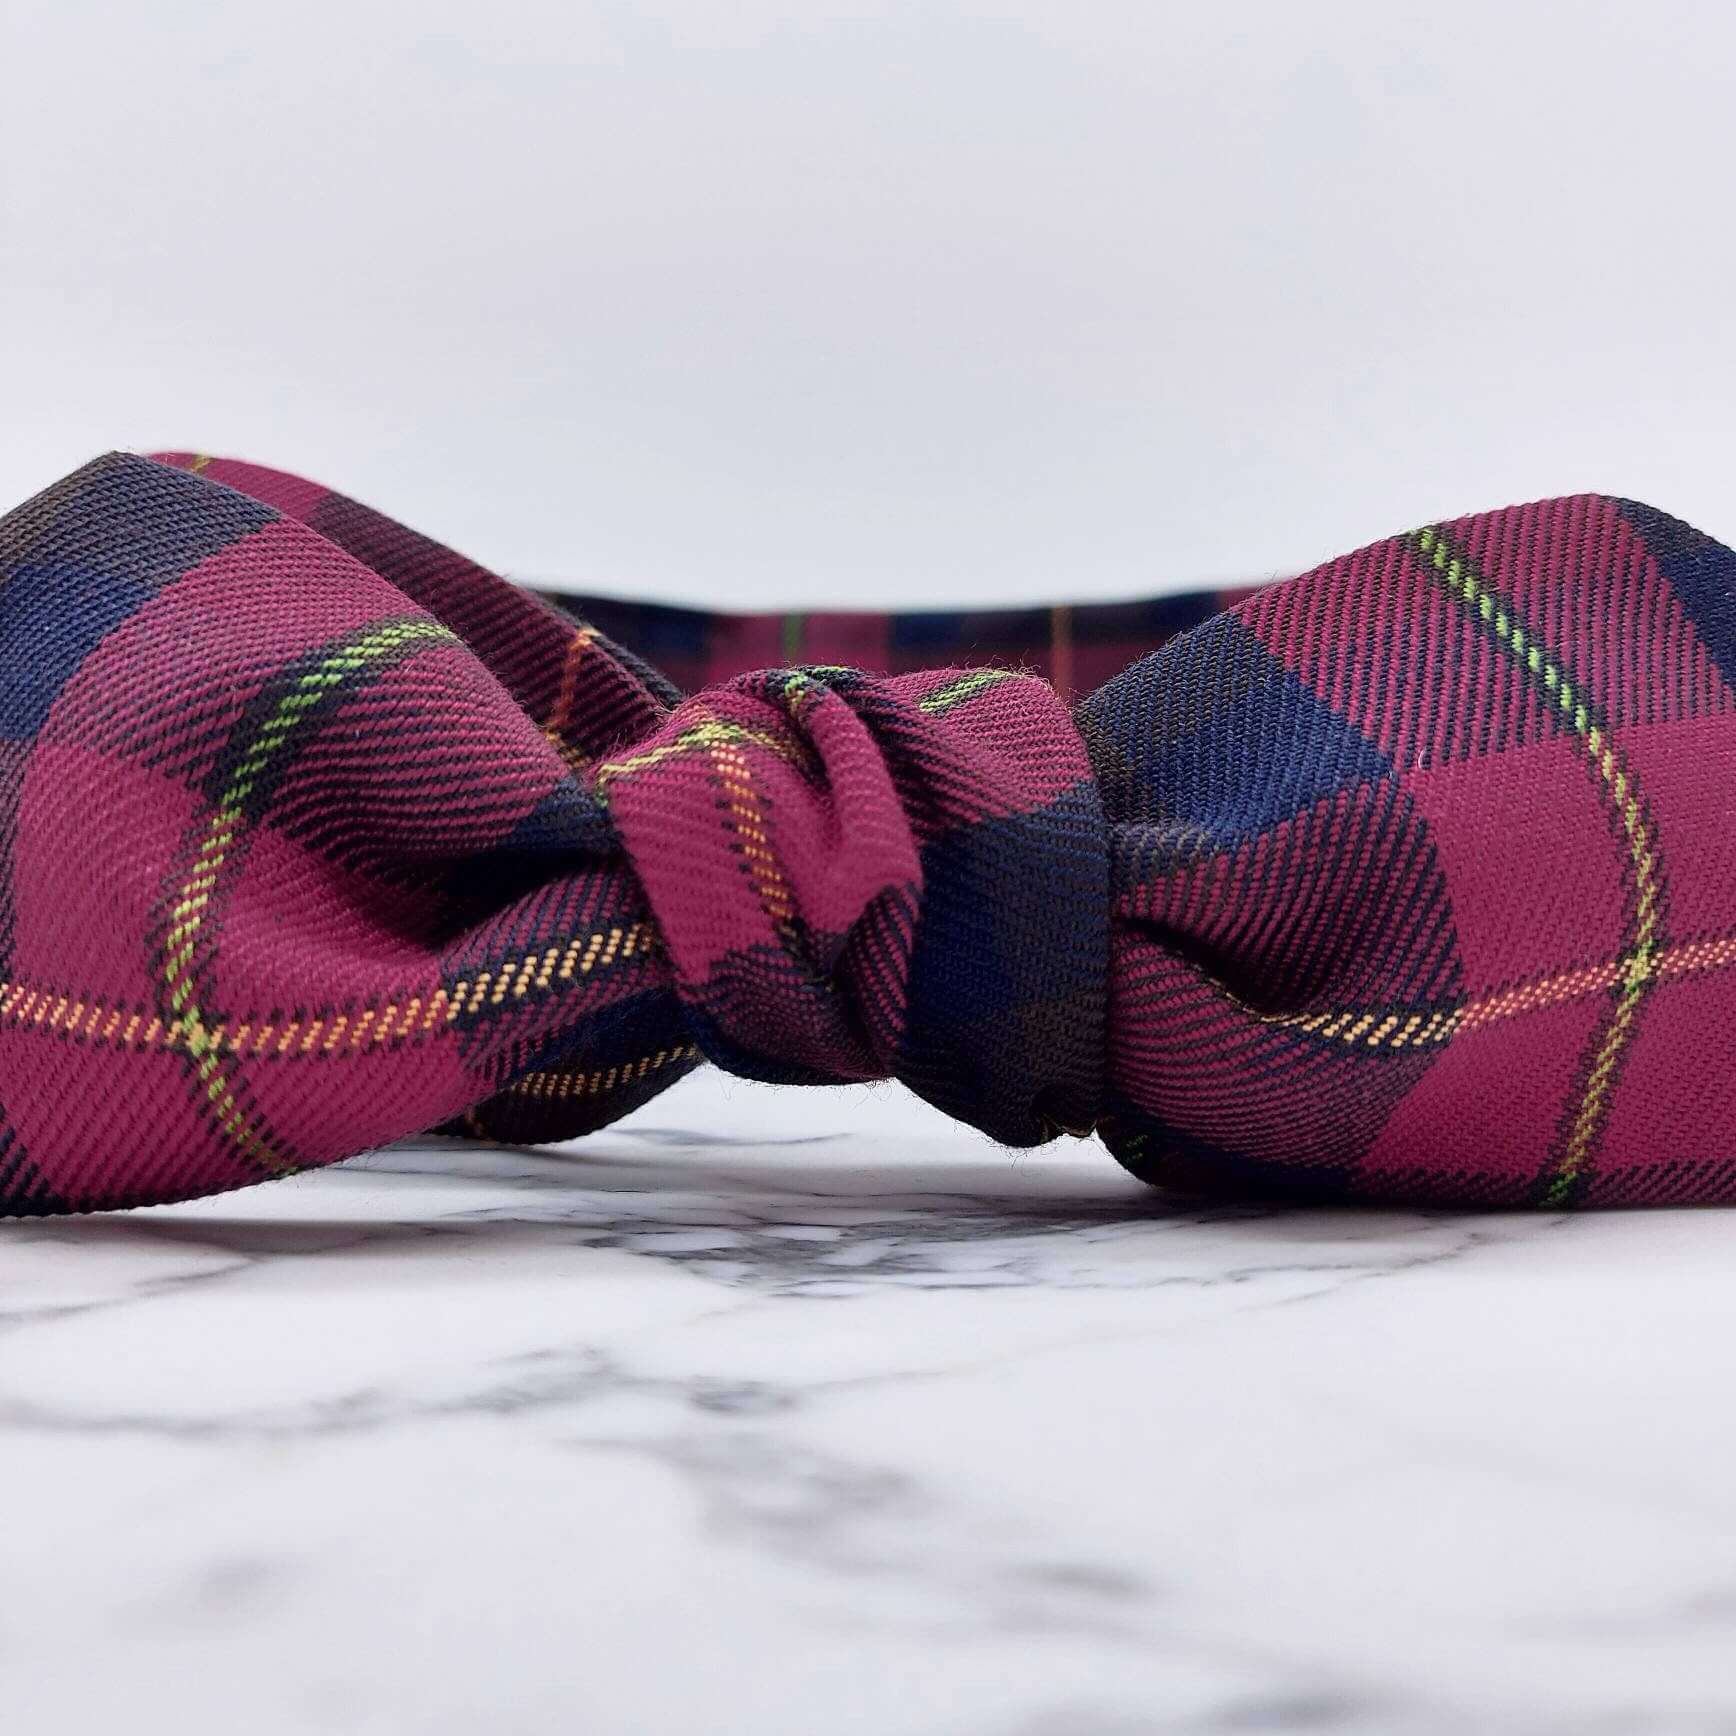 A dark cranberry and brown fabric, tartan paid tie headscarf, tied in a pretty knot.